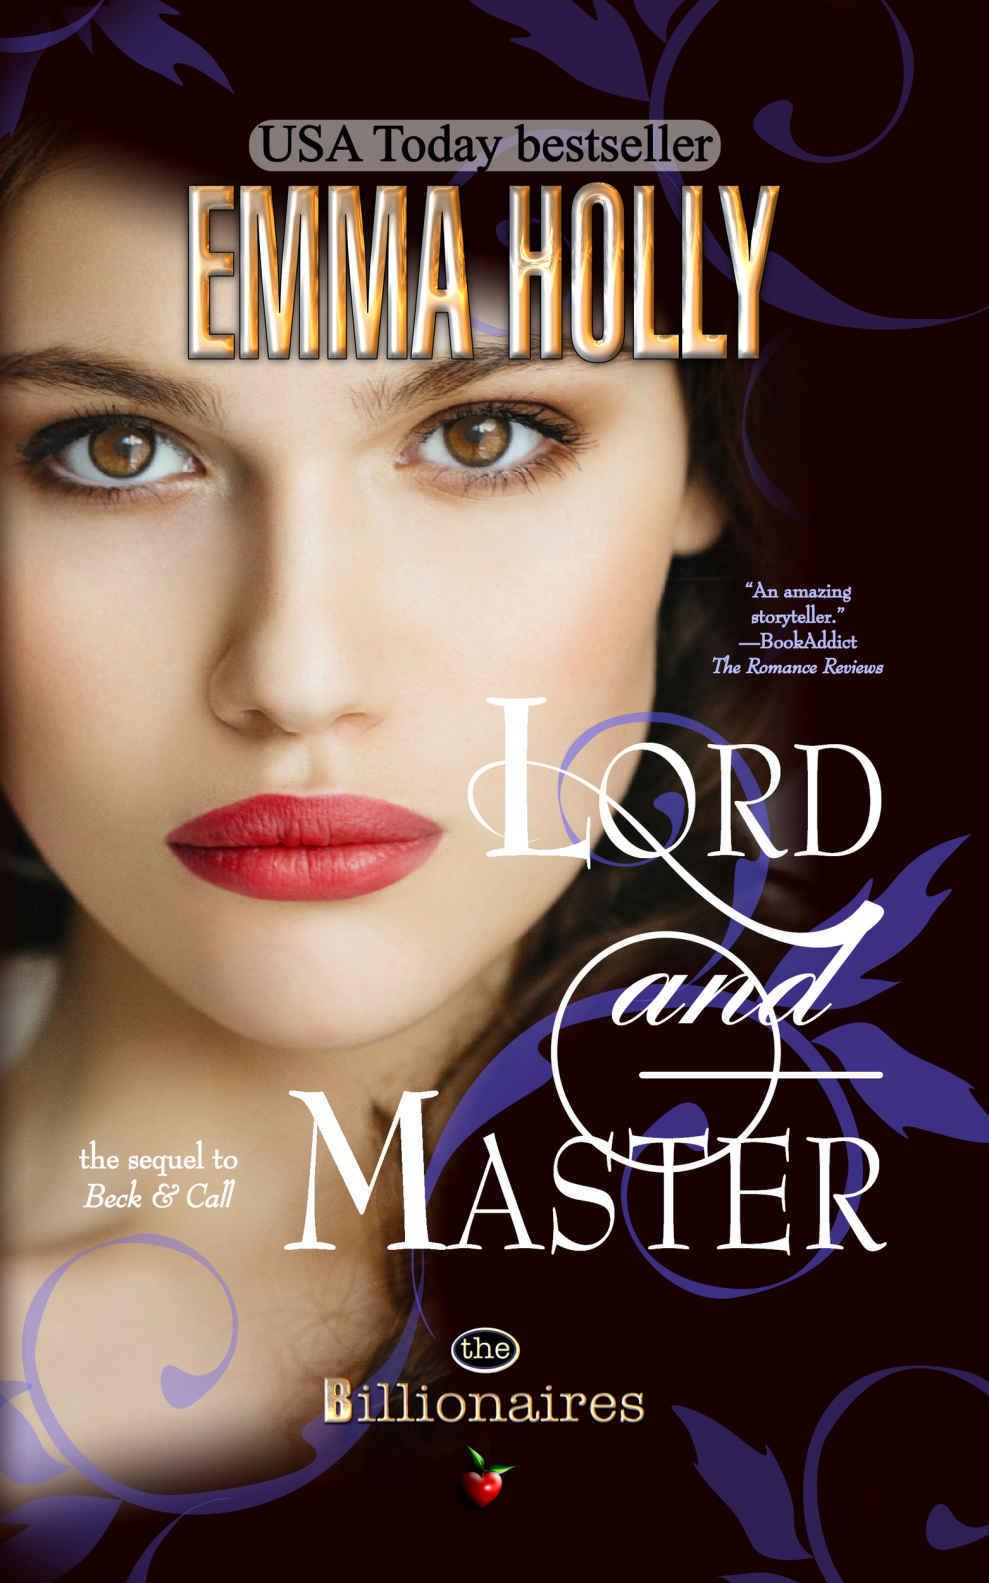 Lord & Master by Emma Holly